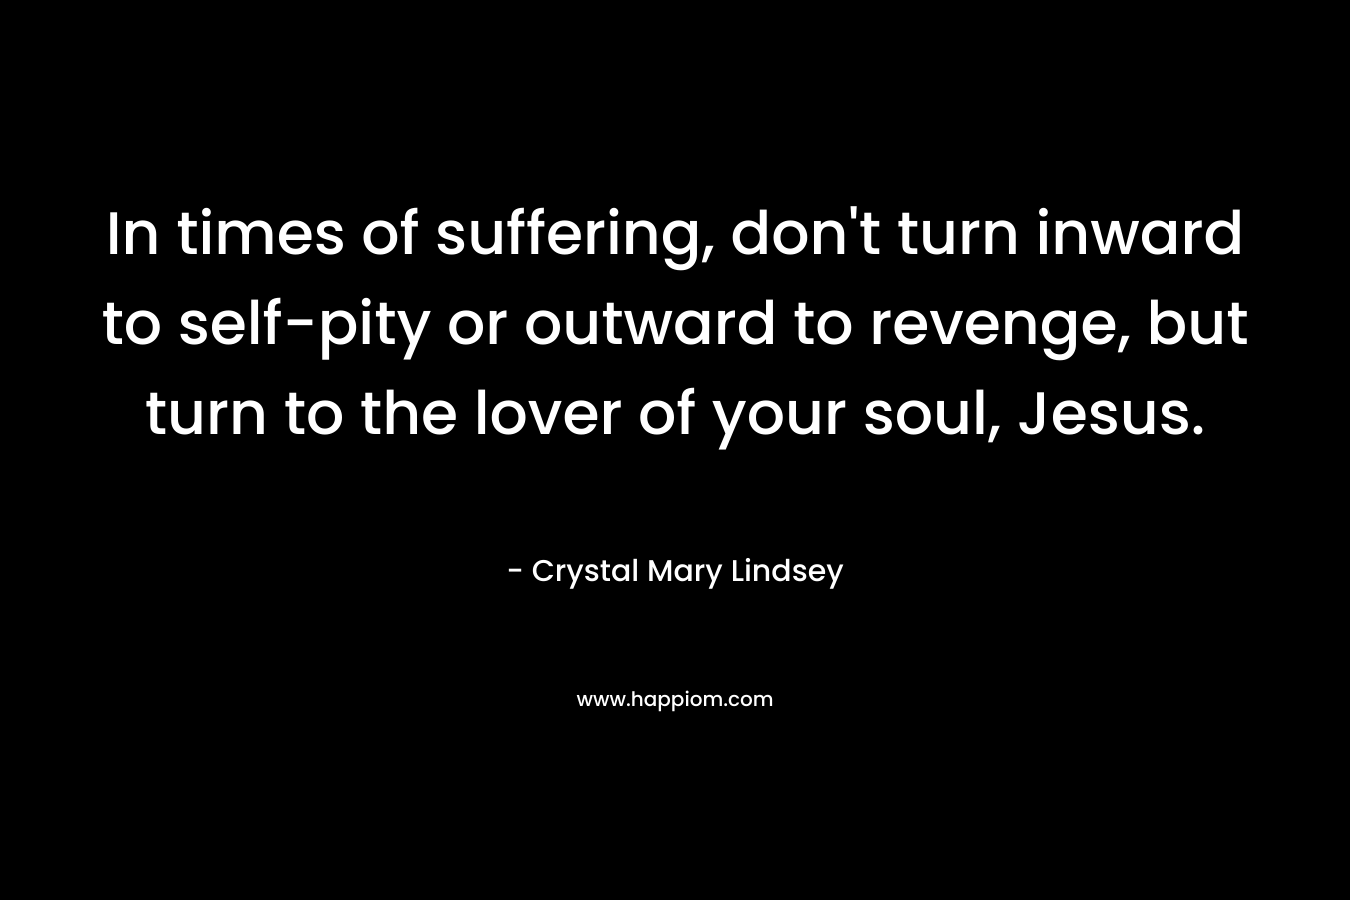 In times of suffering, don't turn inward to self-pity or outward to revenge, but turn to the lover of your soul, Jesus.